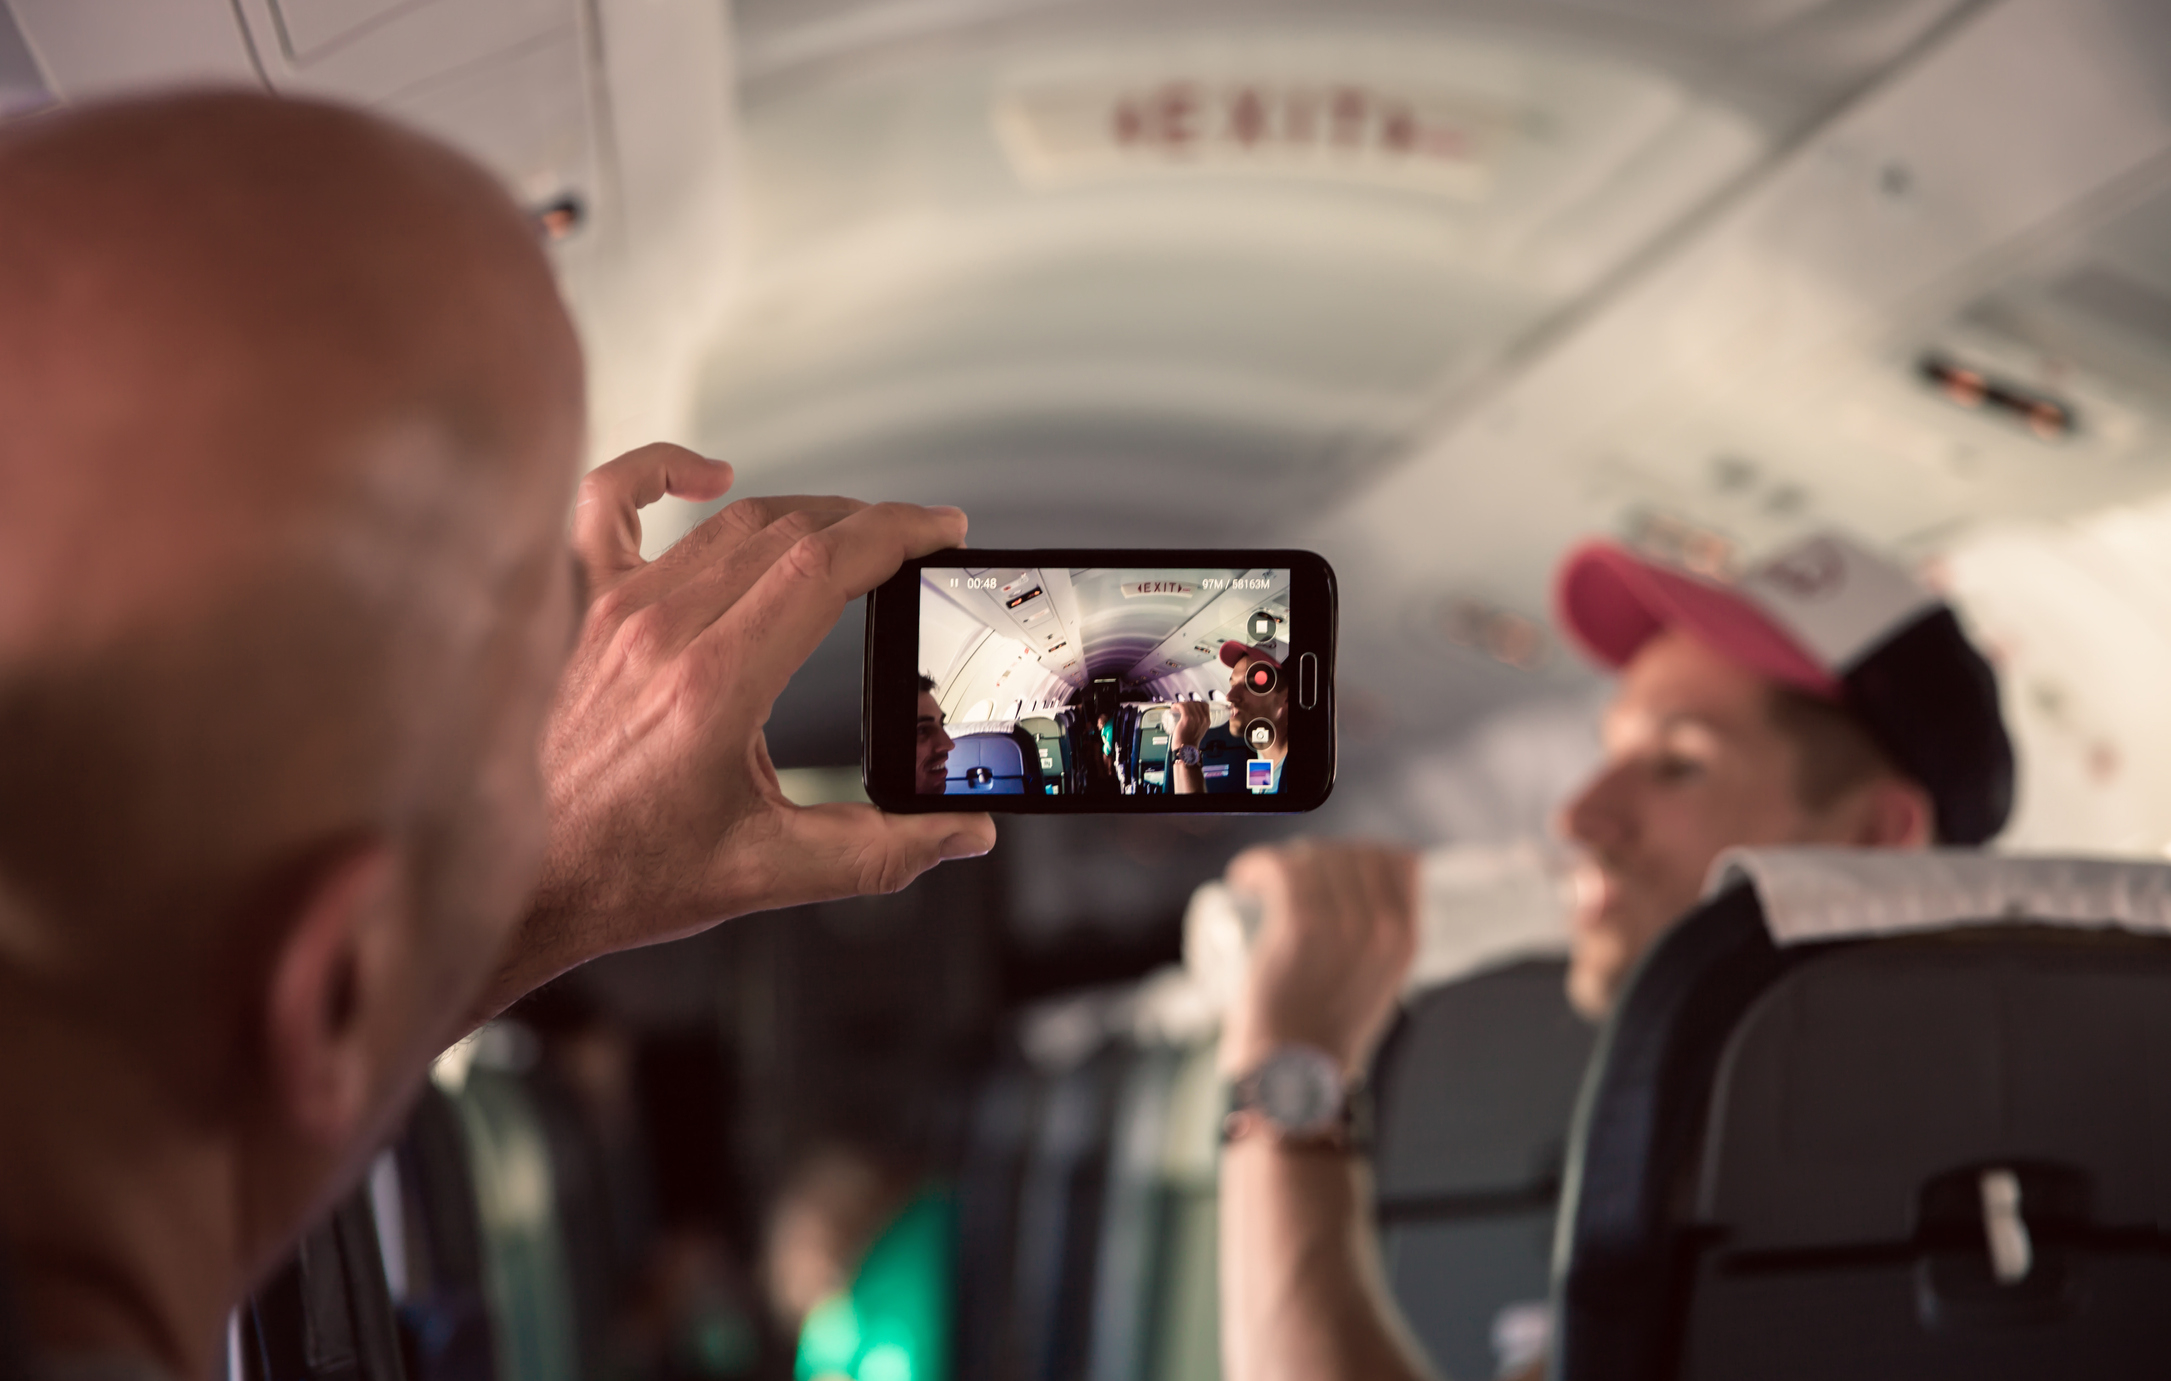 Person taking a photo with smartphone inside an airplane cabin